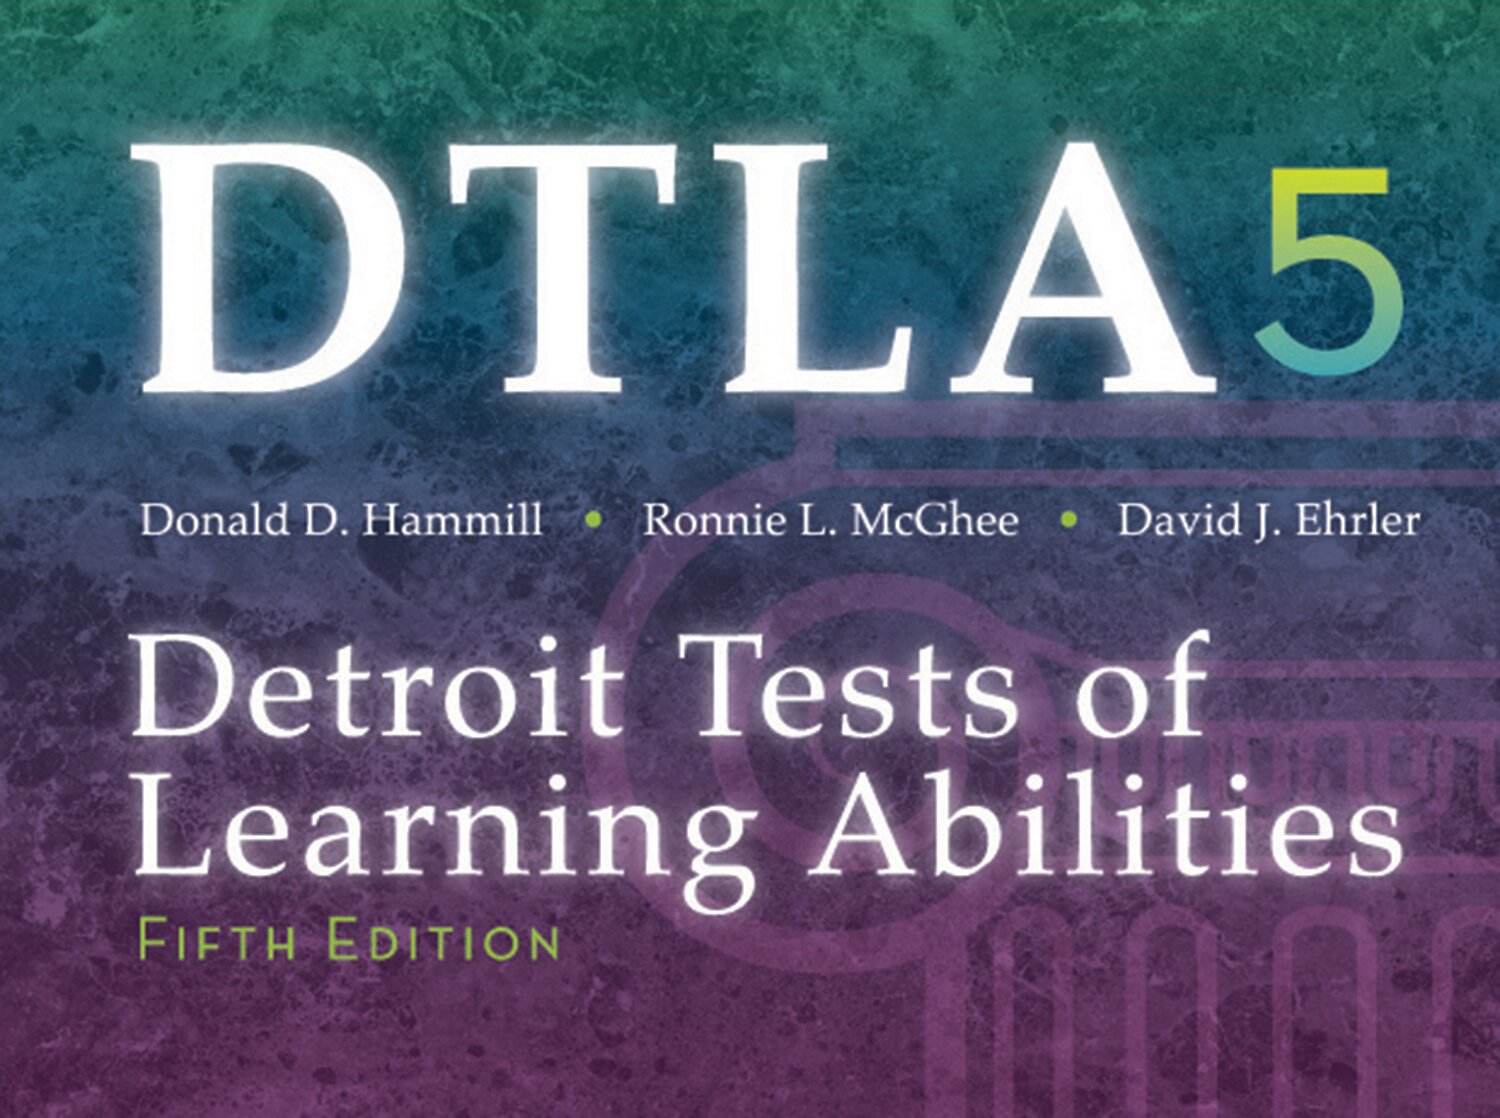 Detroit Tests Of Learning Abilities Fifth Edition DTLA 5 